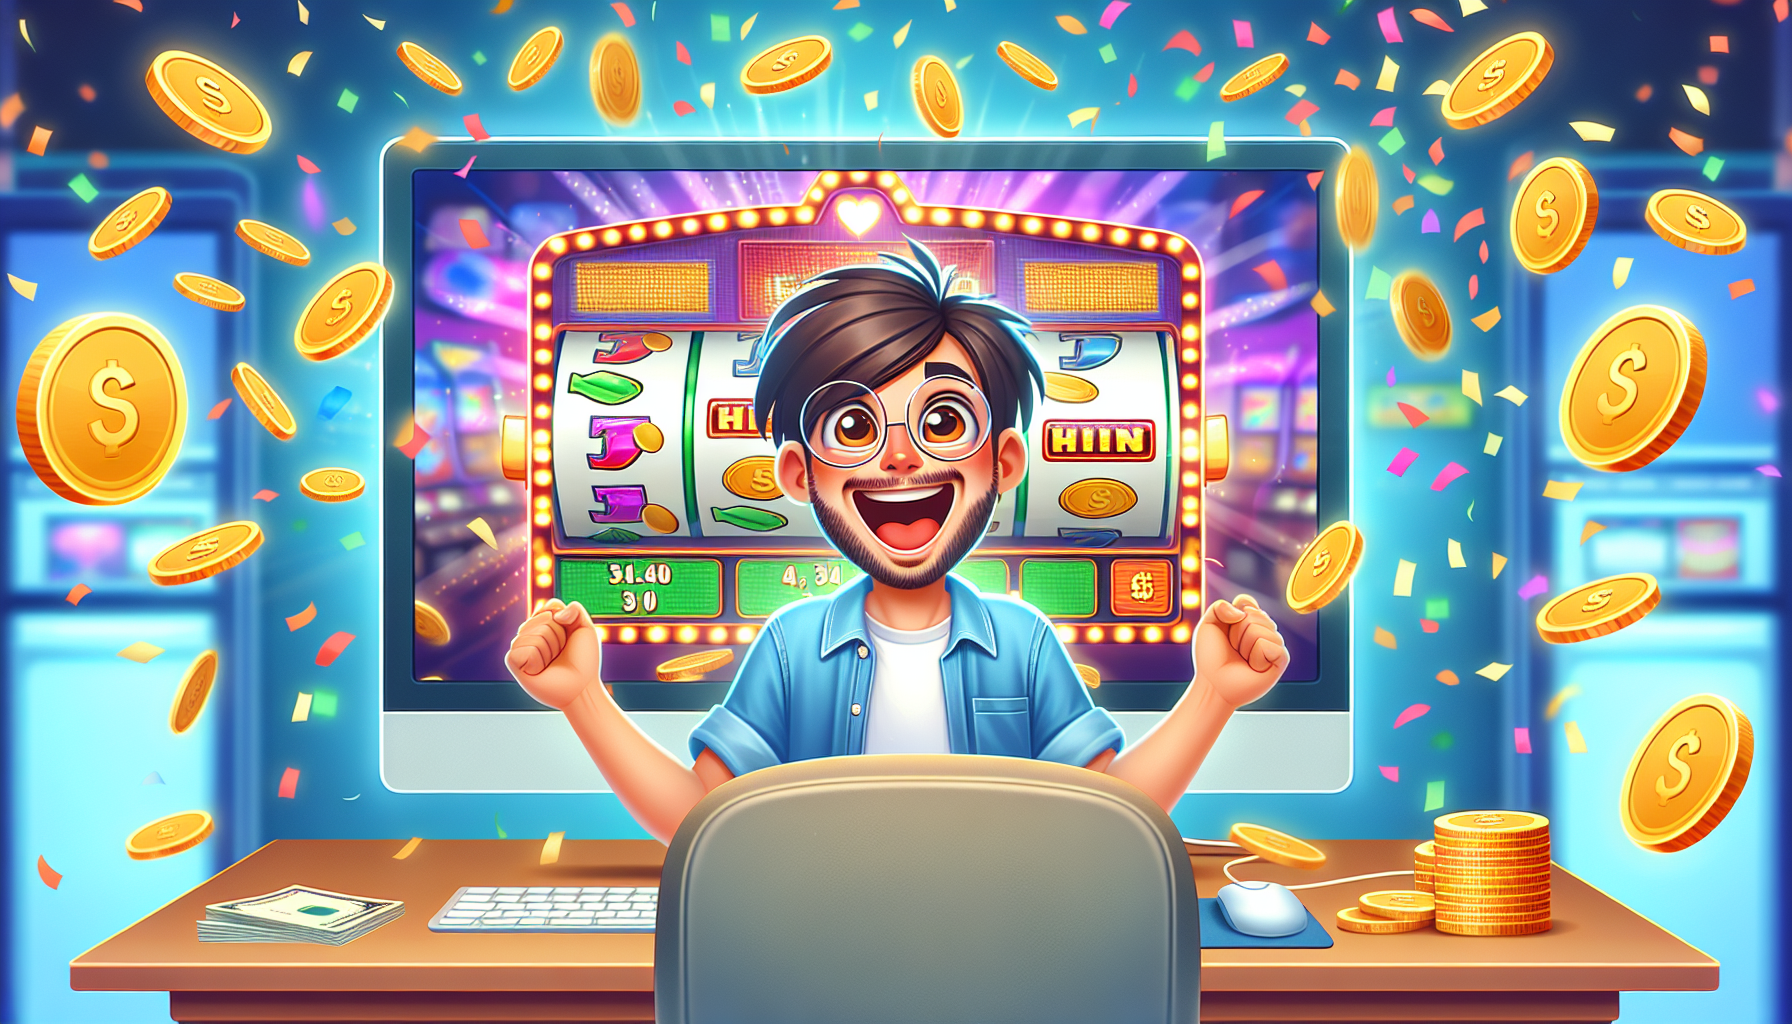 Real money casino games with big wins and bonuses